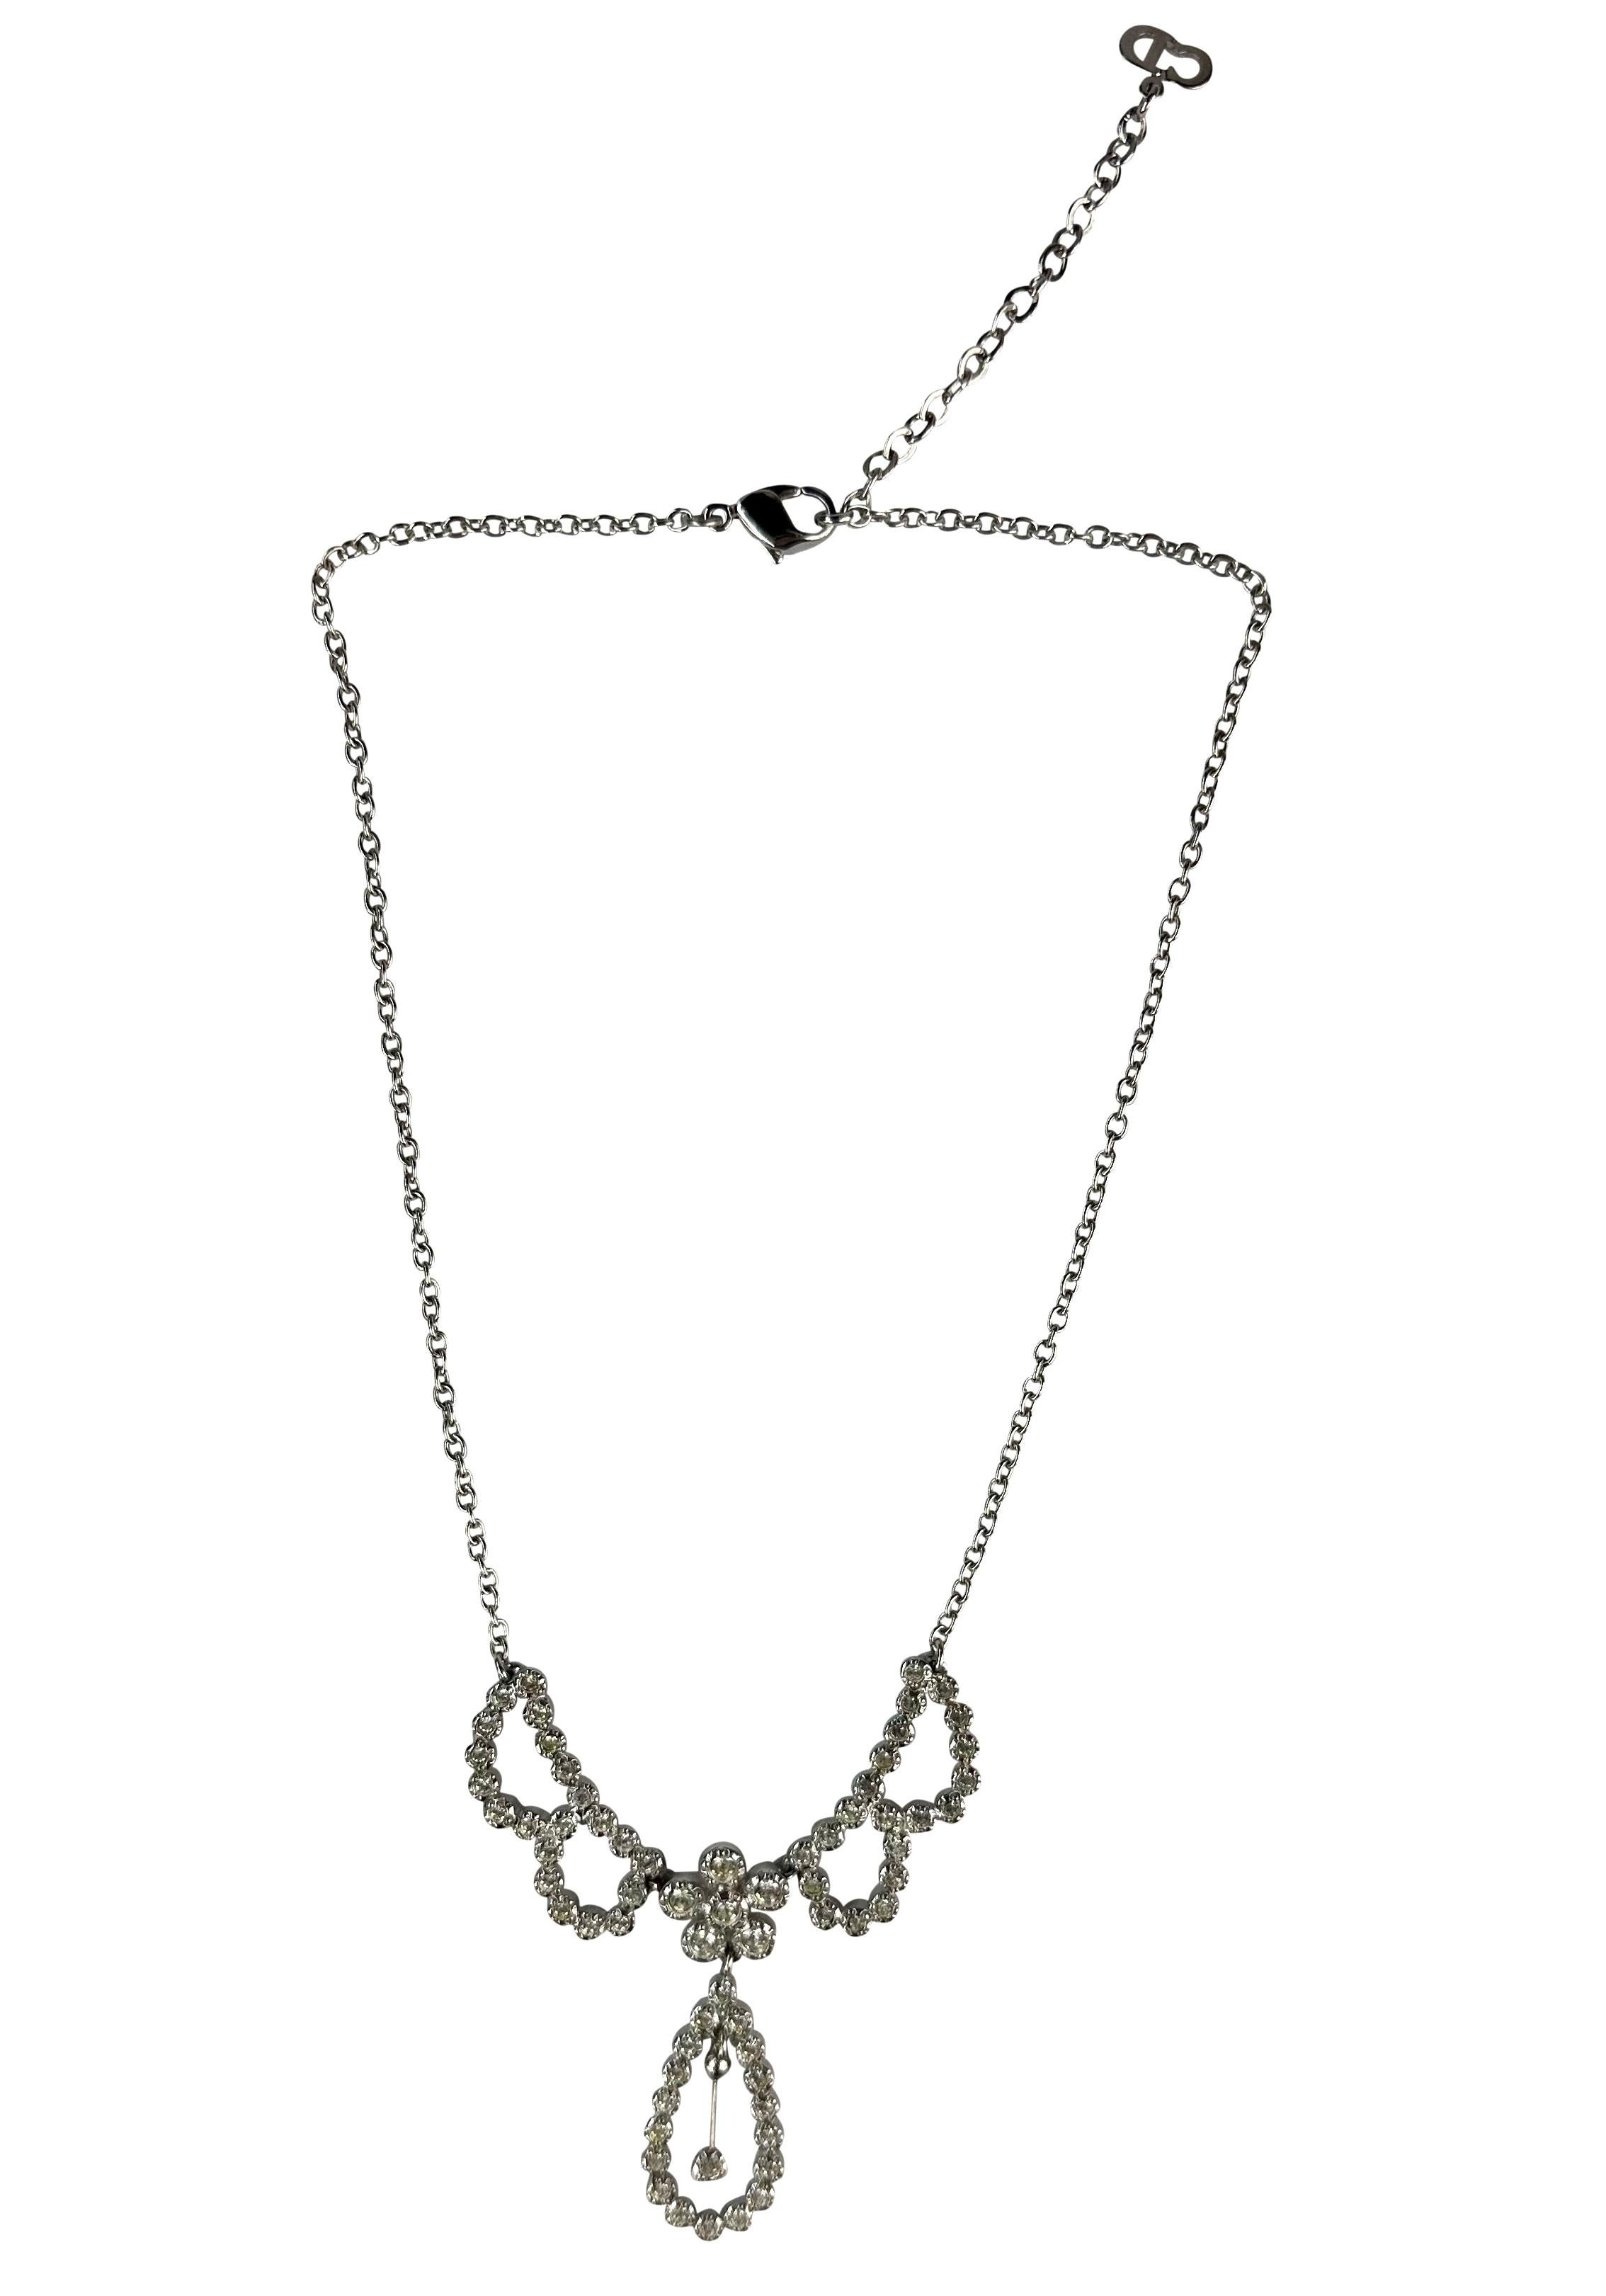 Presenting a silver-tone Christian Dior rhinestone accented drop necklace, designed by John Galliano. From the early 2000s, this beautiful necklace features a dainty chain with a rhinestone-covered drop.

Approximate Measurements:
Chain Length: 15 -